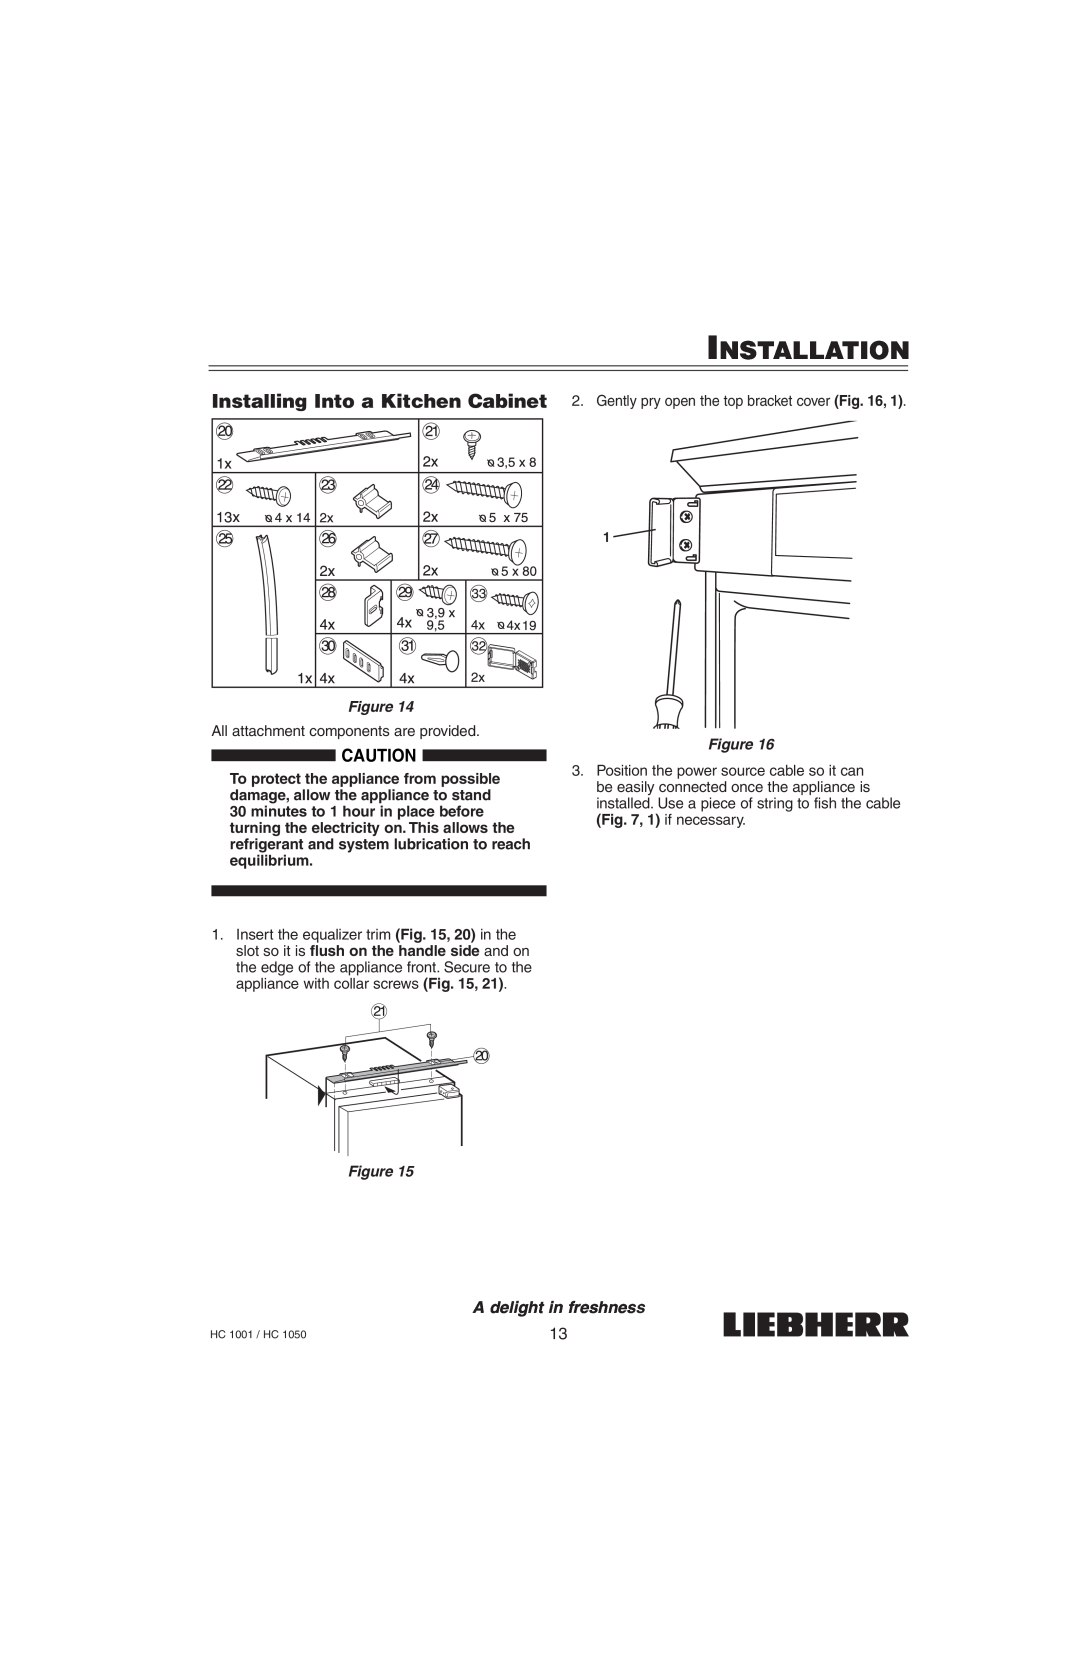 Liebherr HC1050, HC1001 installation manual Installation, A delight in freshness, All attachment components are provided 